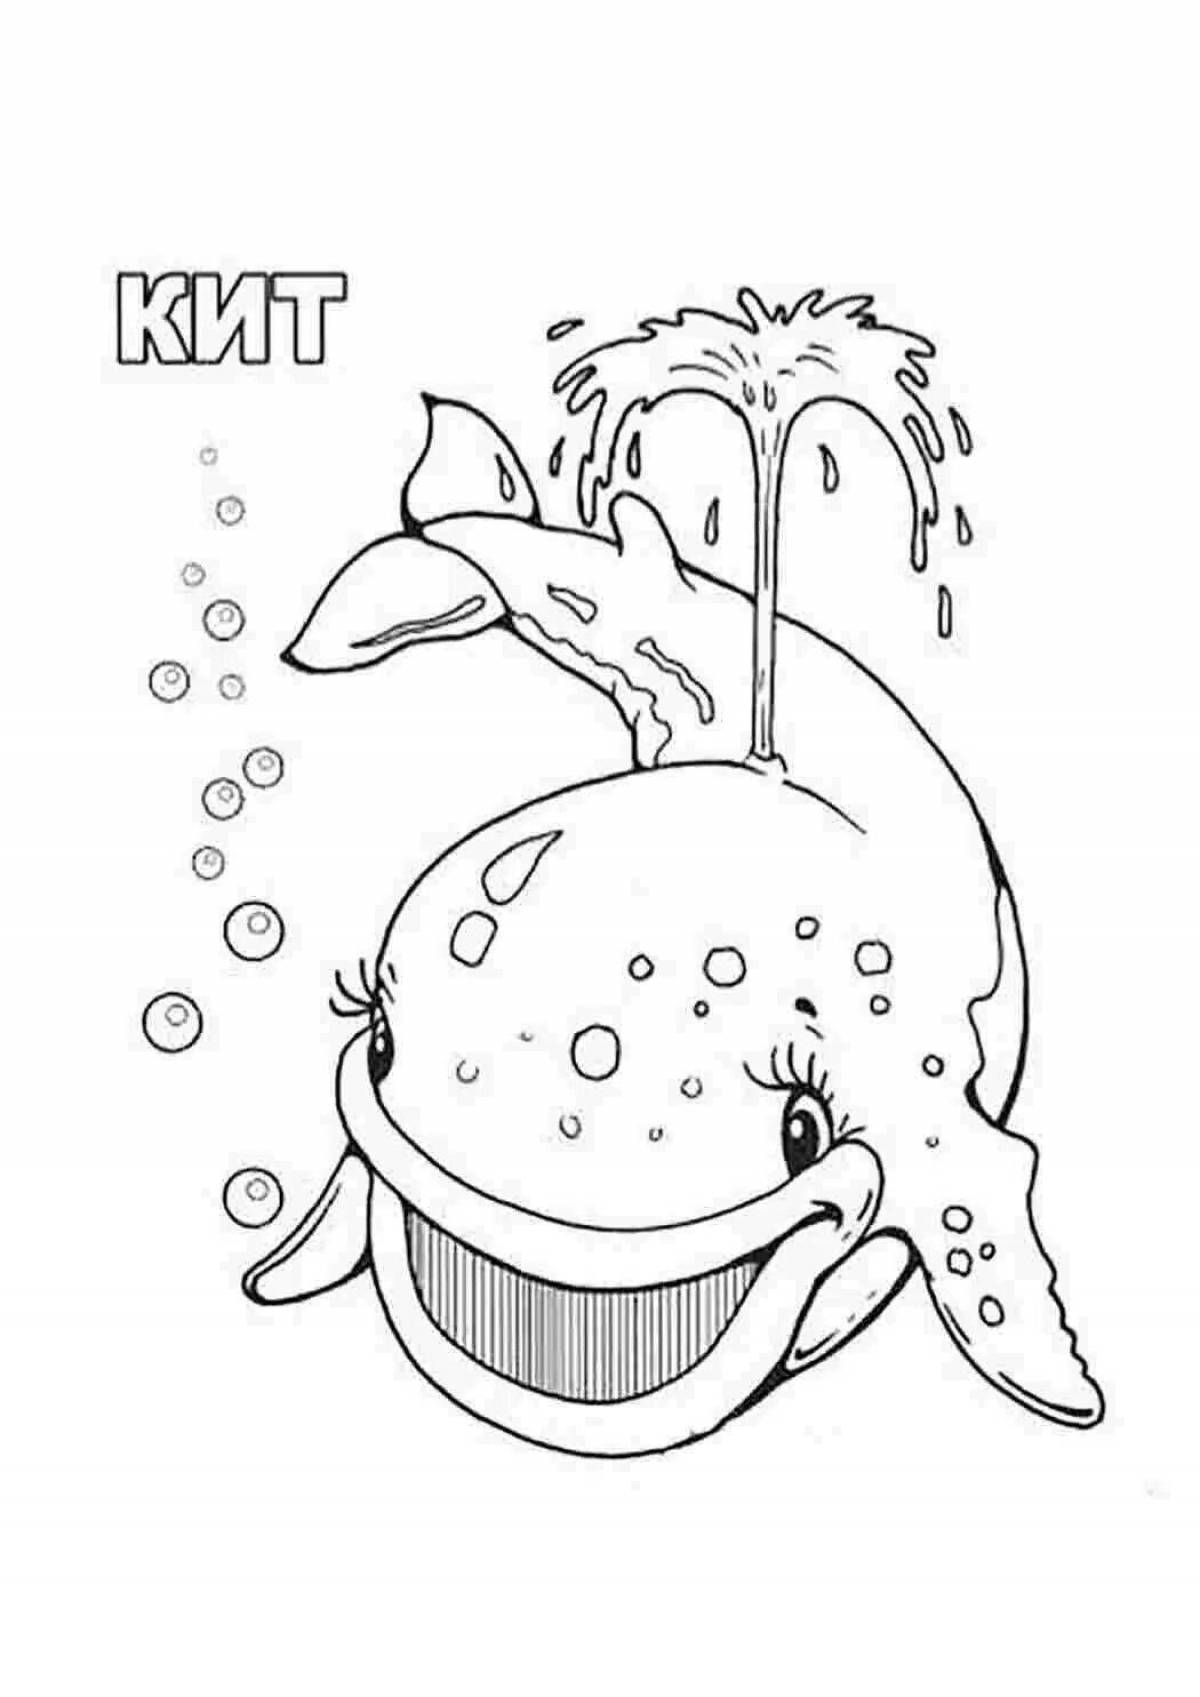 Inviting three whales in music coloring book